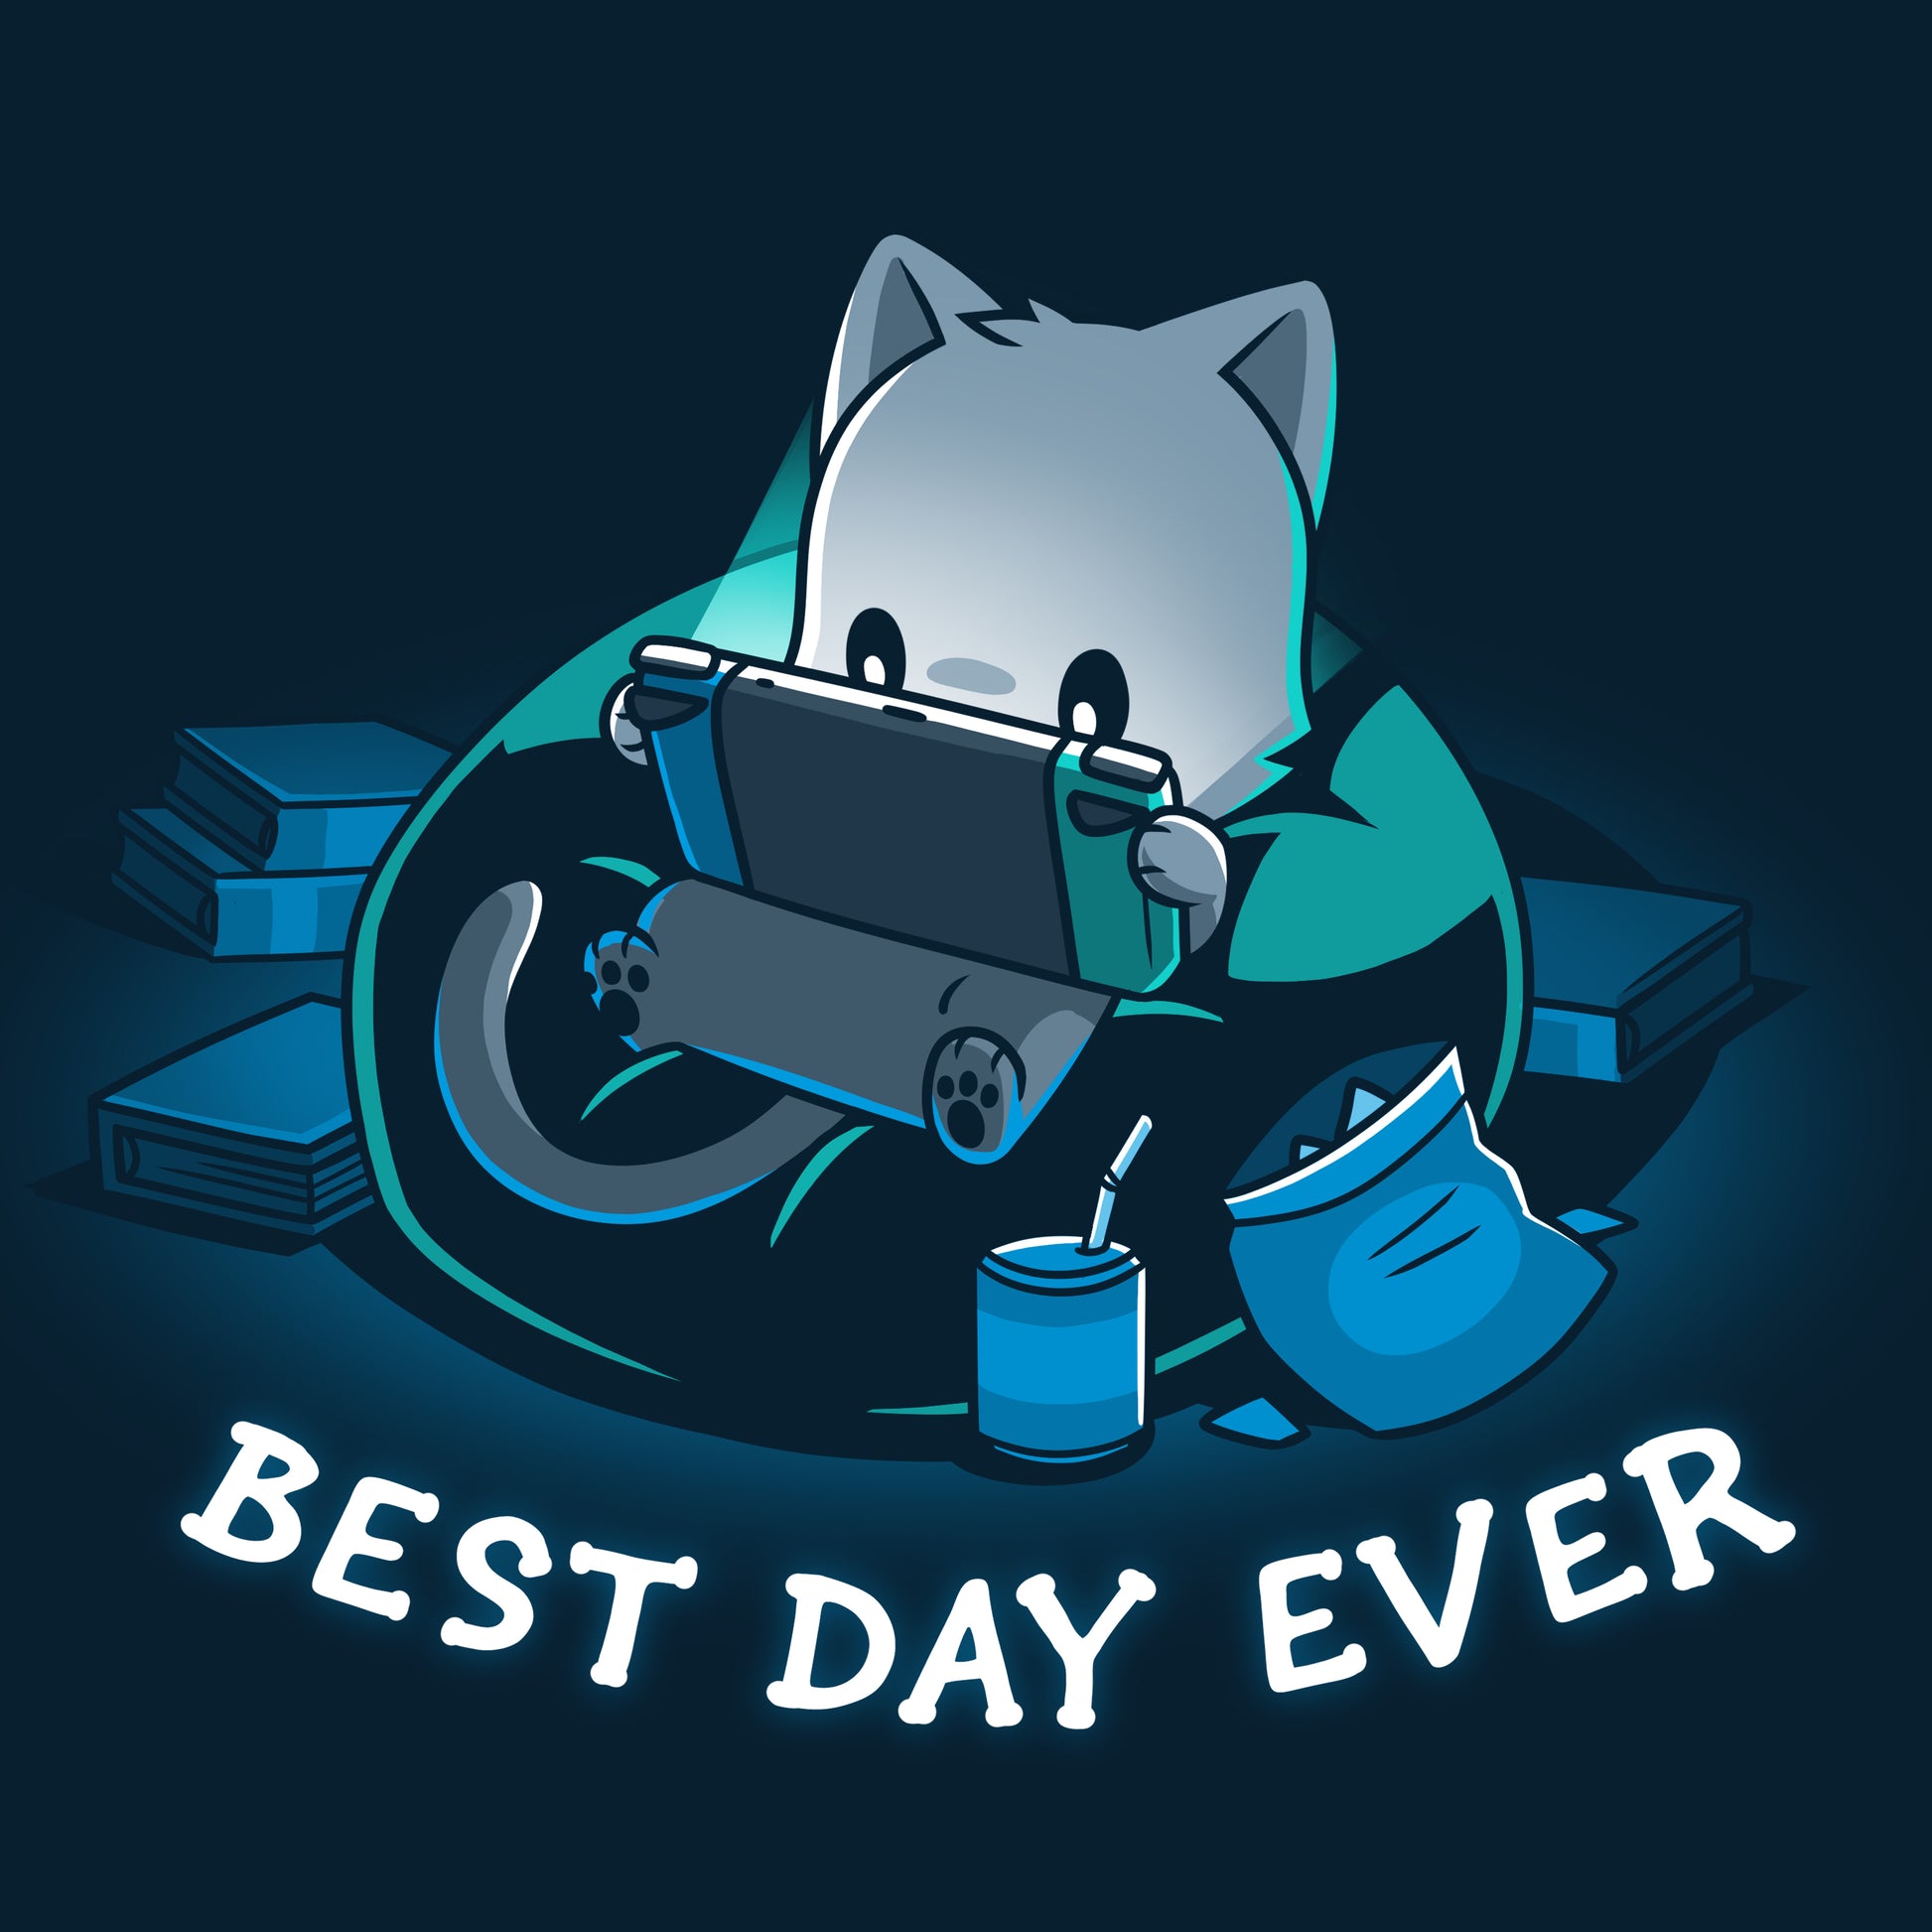 A navy blue t-shirt featuring a cat comfortably sitting in a bean bag, expressing the words "Best Day Ever" by TeeTurtle.